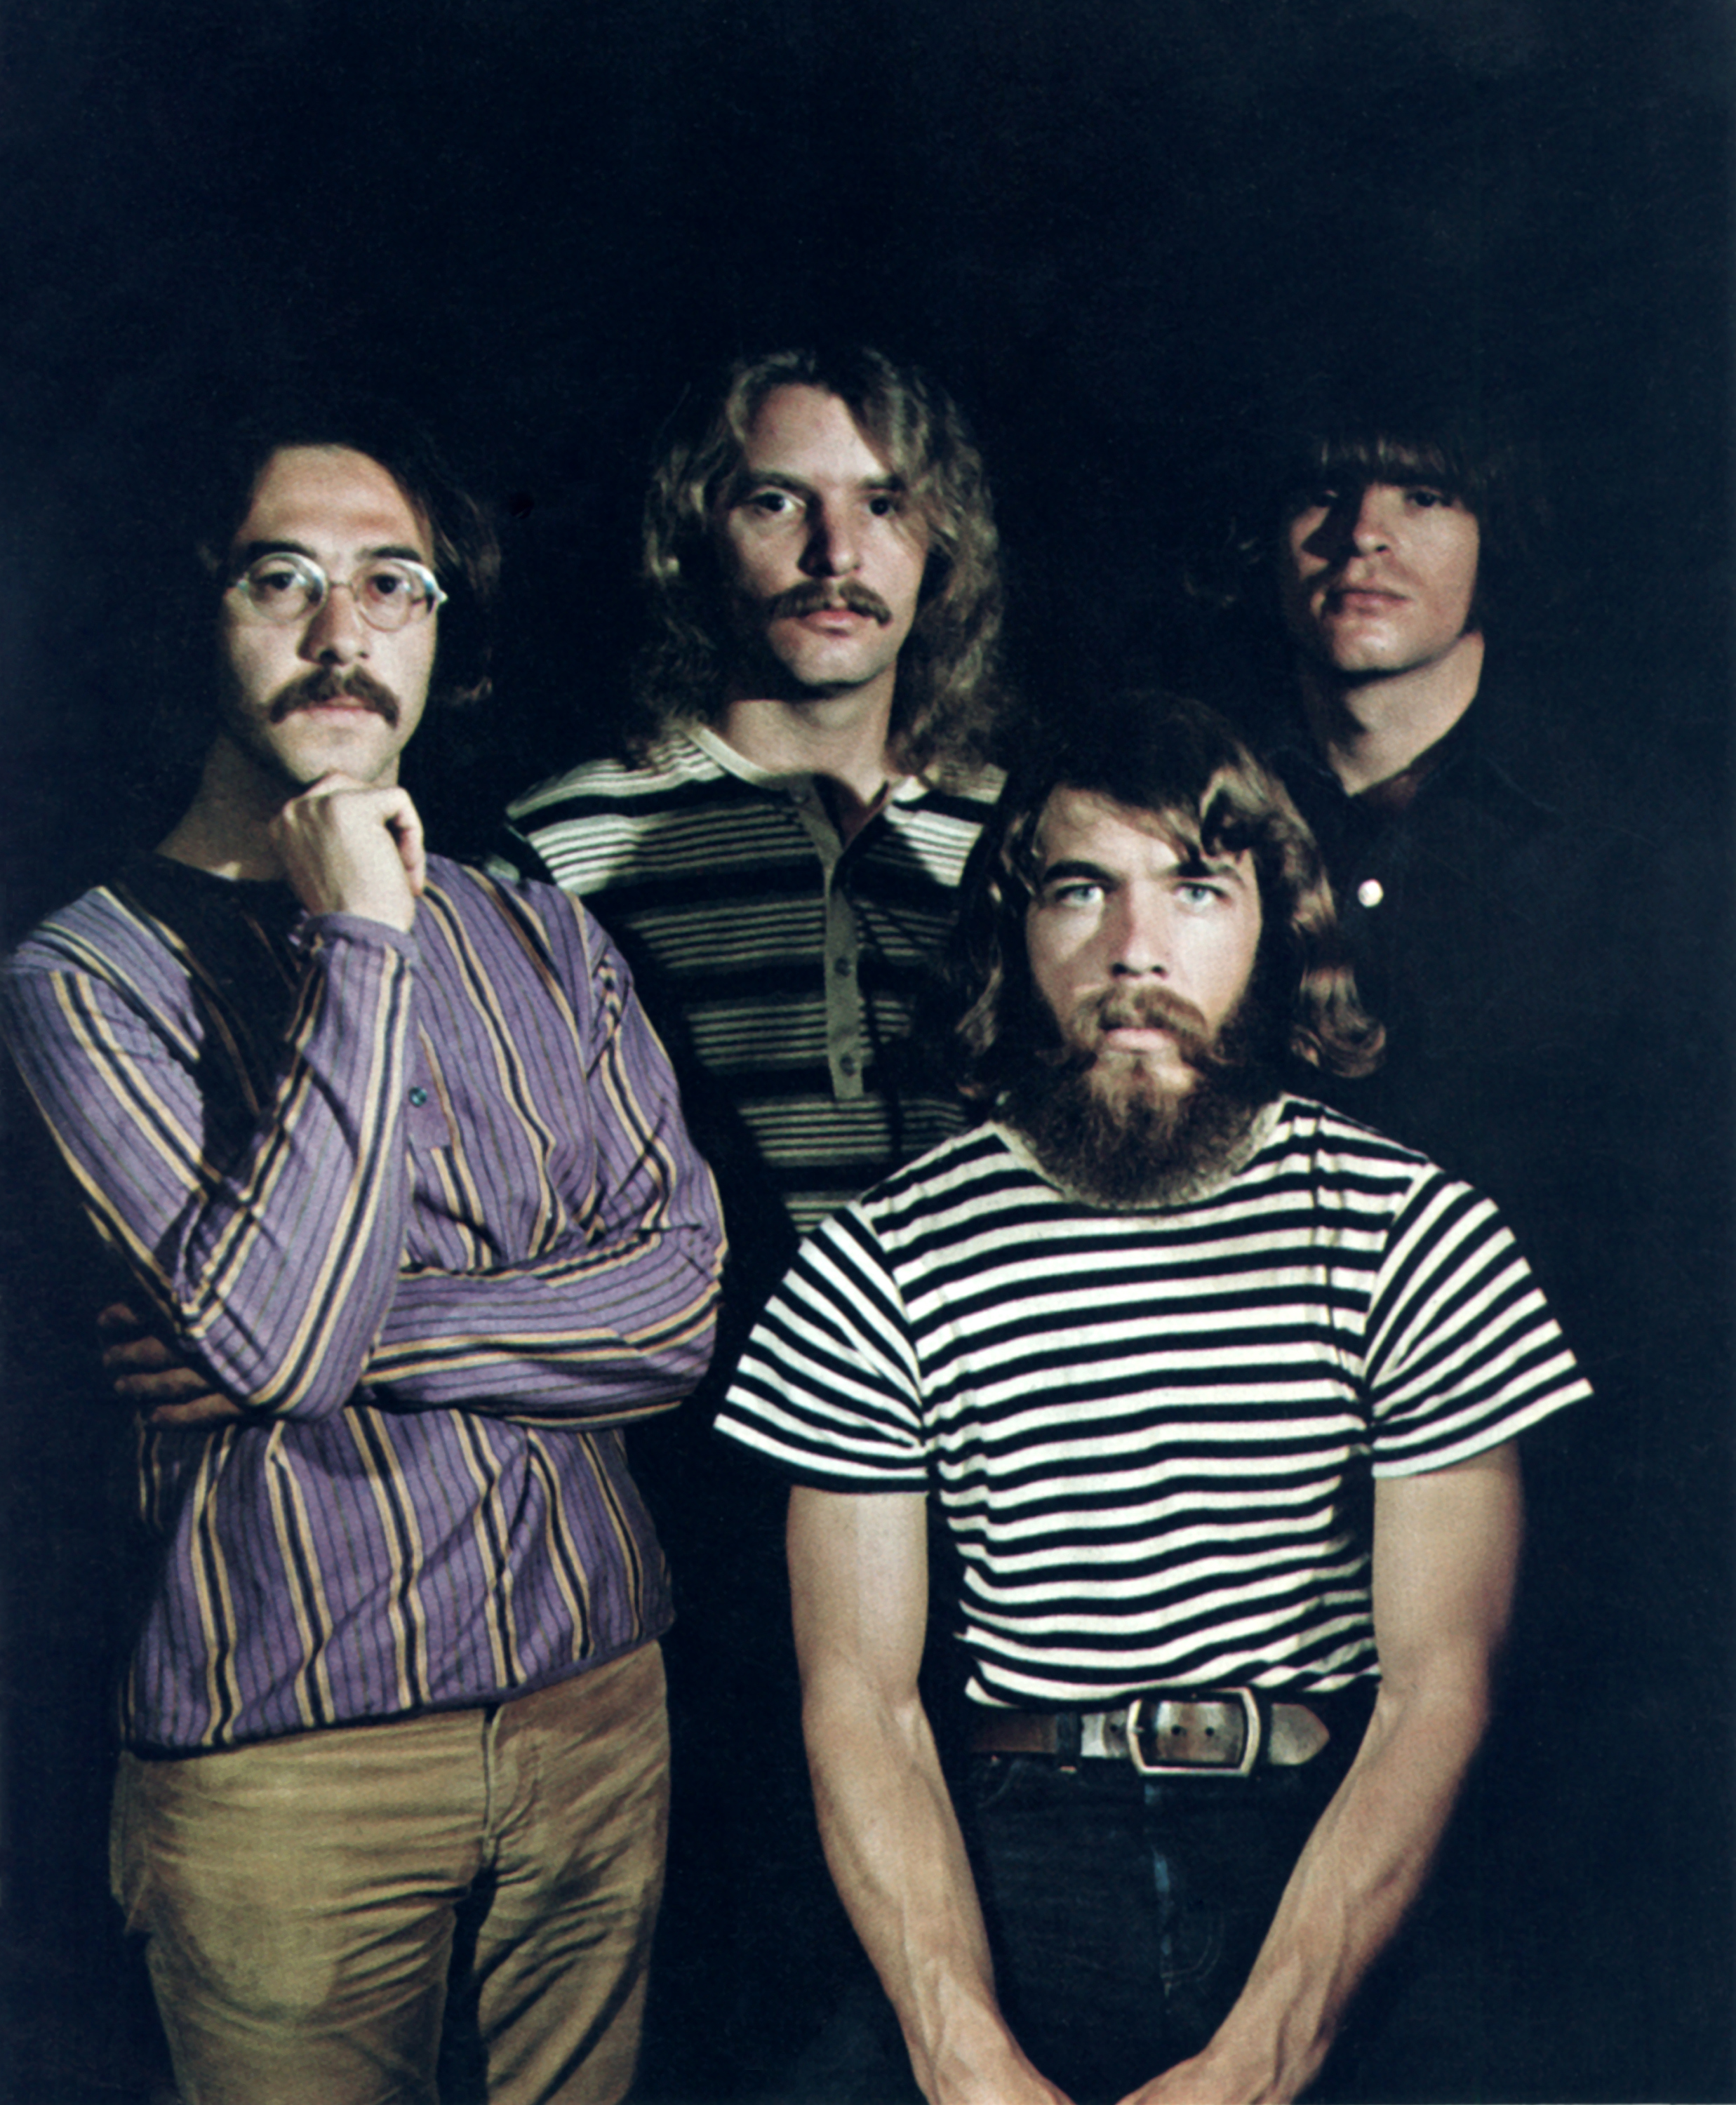 UNSPECIFIED - CIRCA 1970:  Photo of Creedence Clearwater Revival  Photo by Michael Ochs Archives/Getty Images